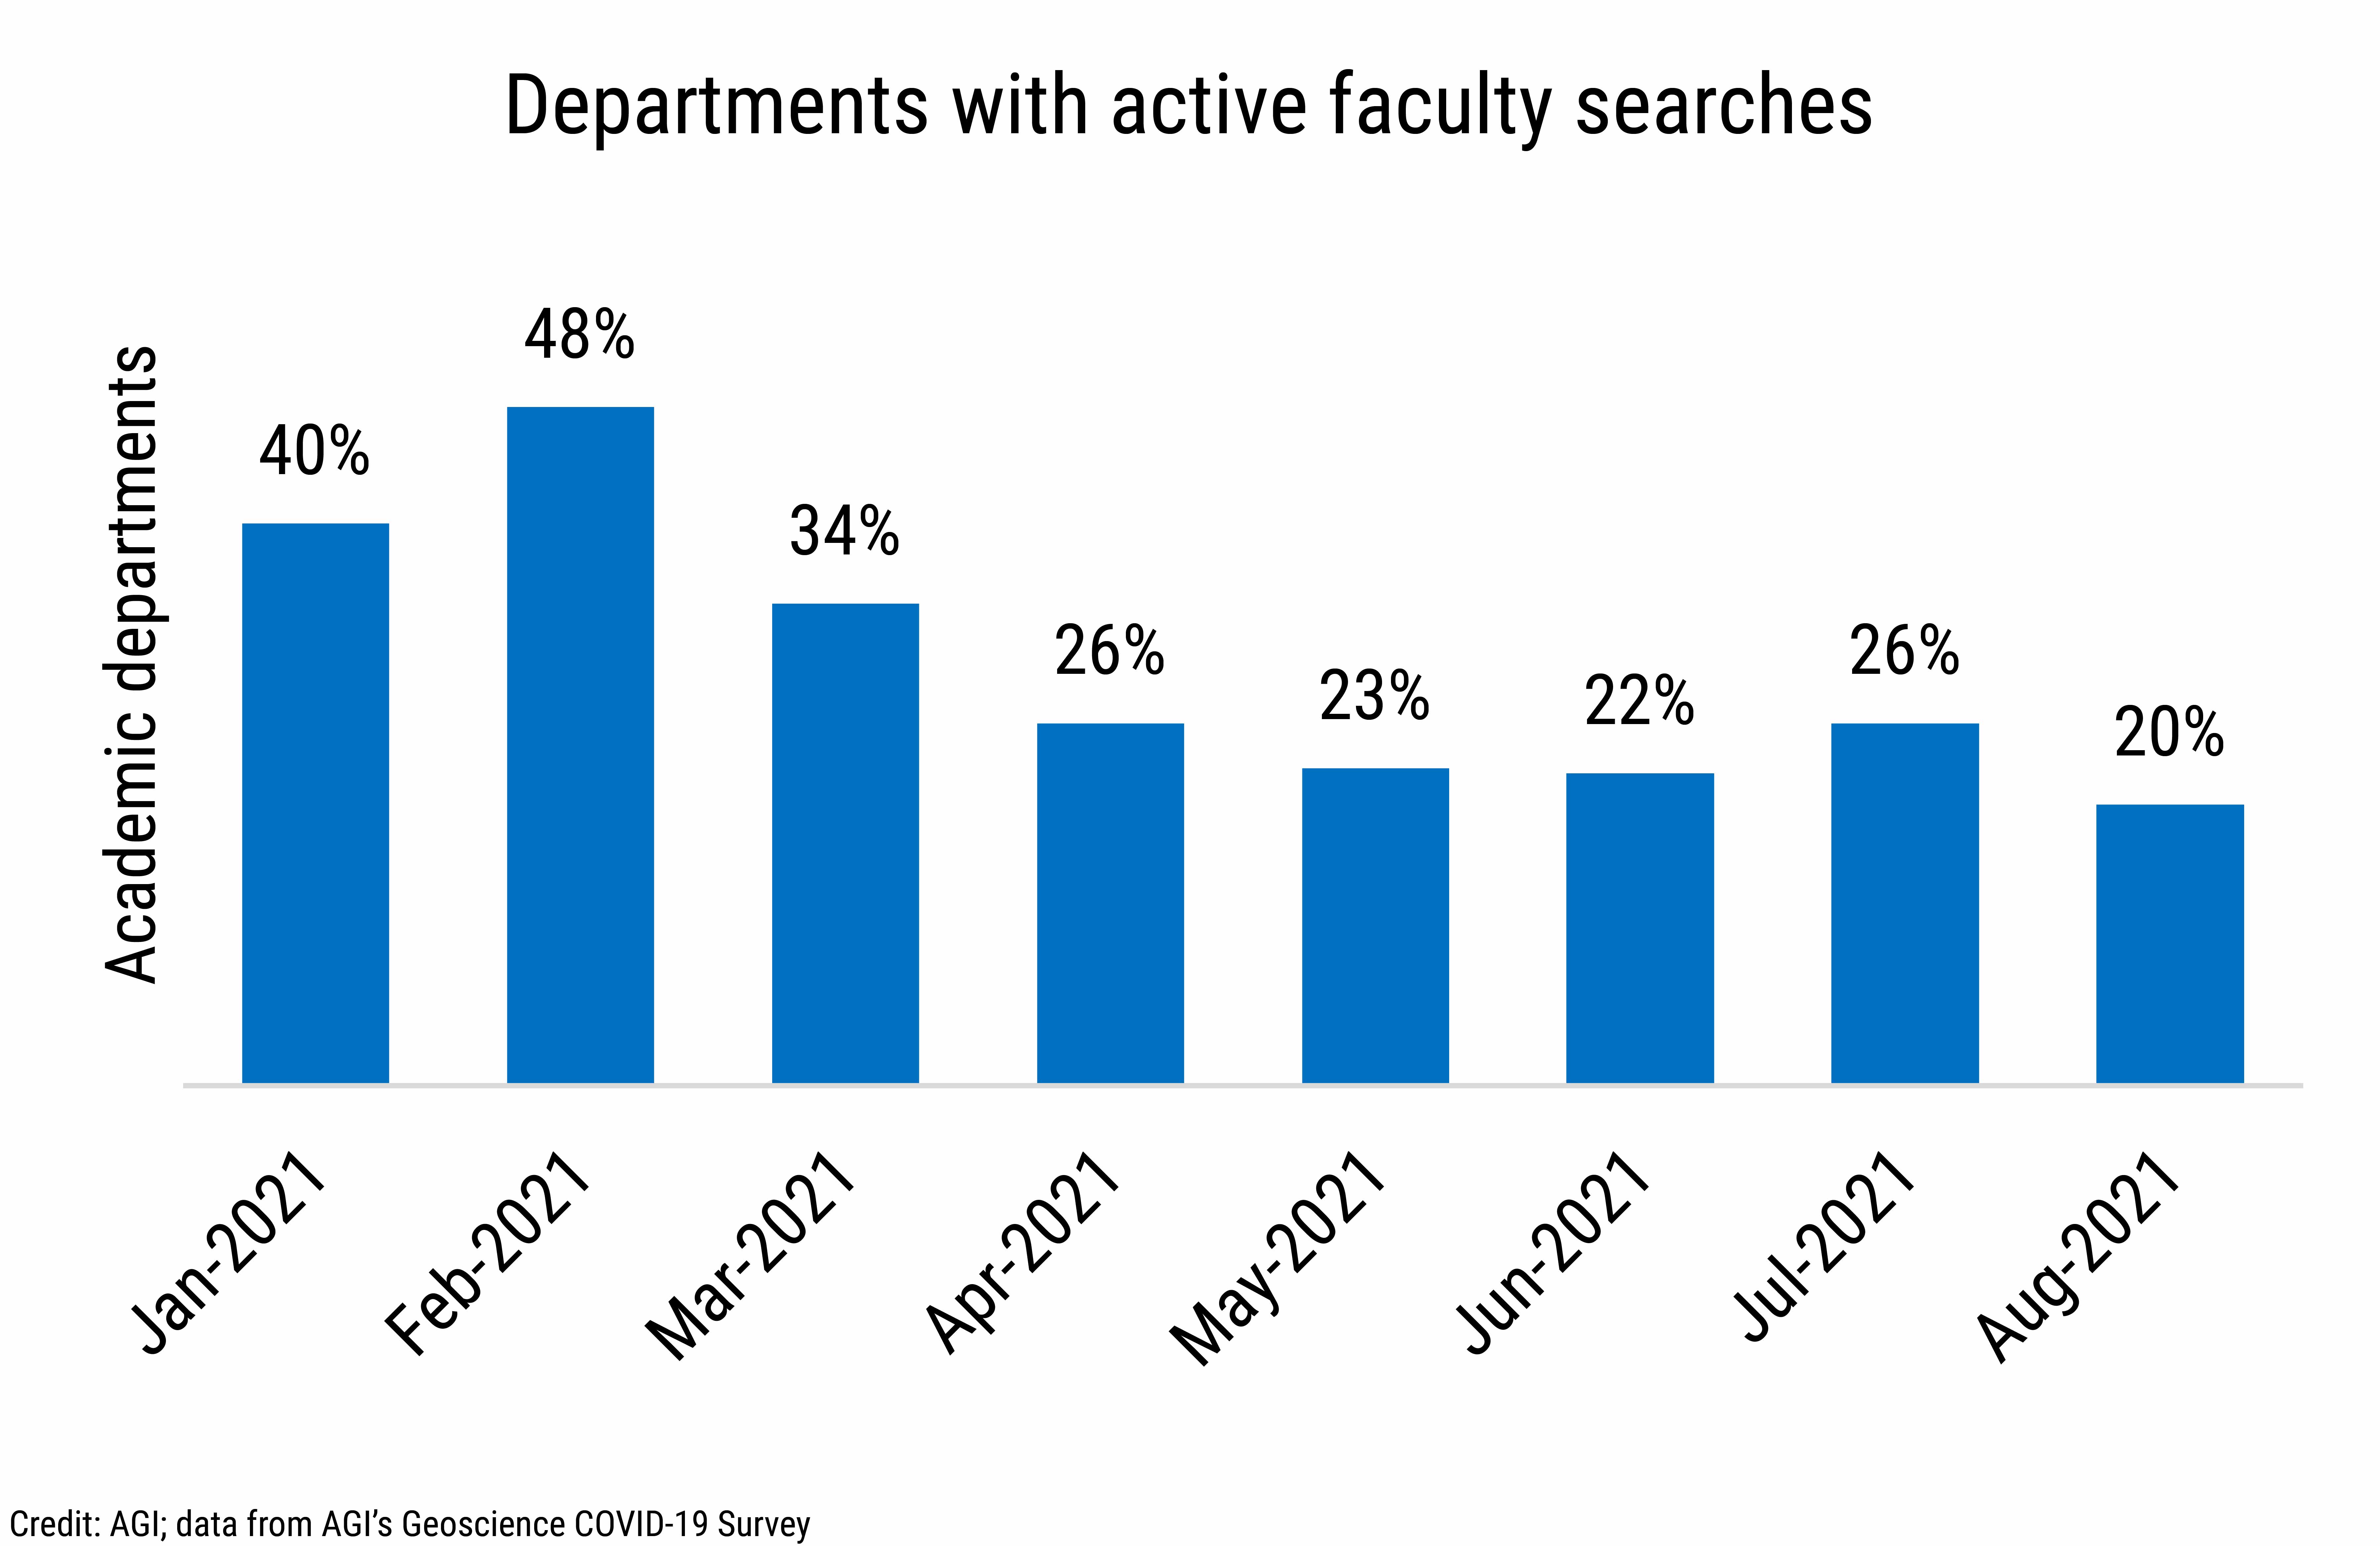 DB_2021-028 chart 02: Departments with active faculty searches (Credit: AGI; data from AGI's Geoscience COVID-19 Survey)